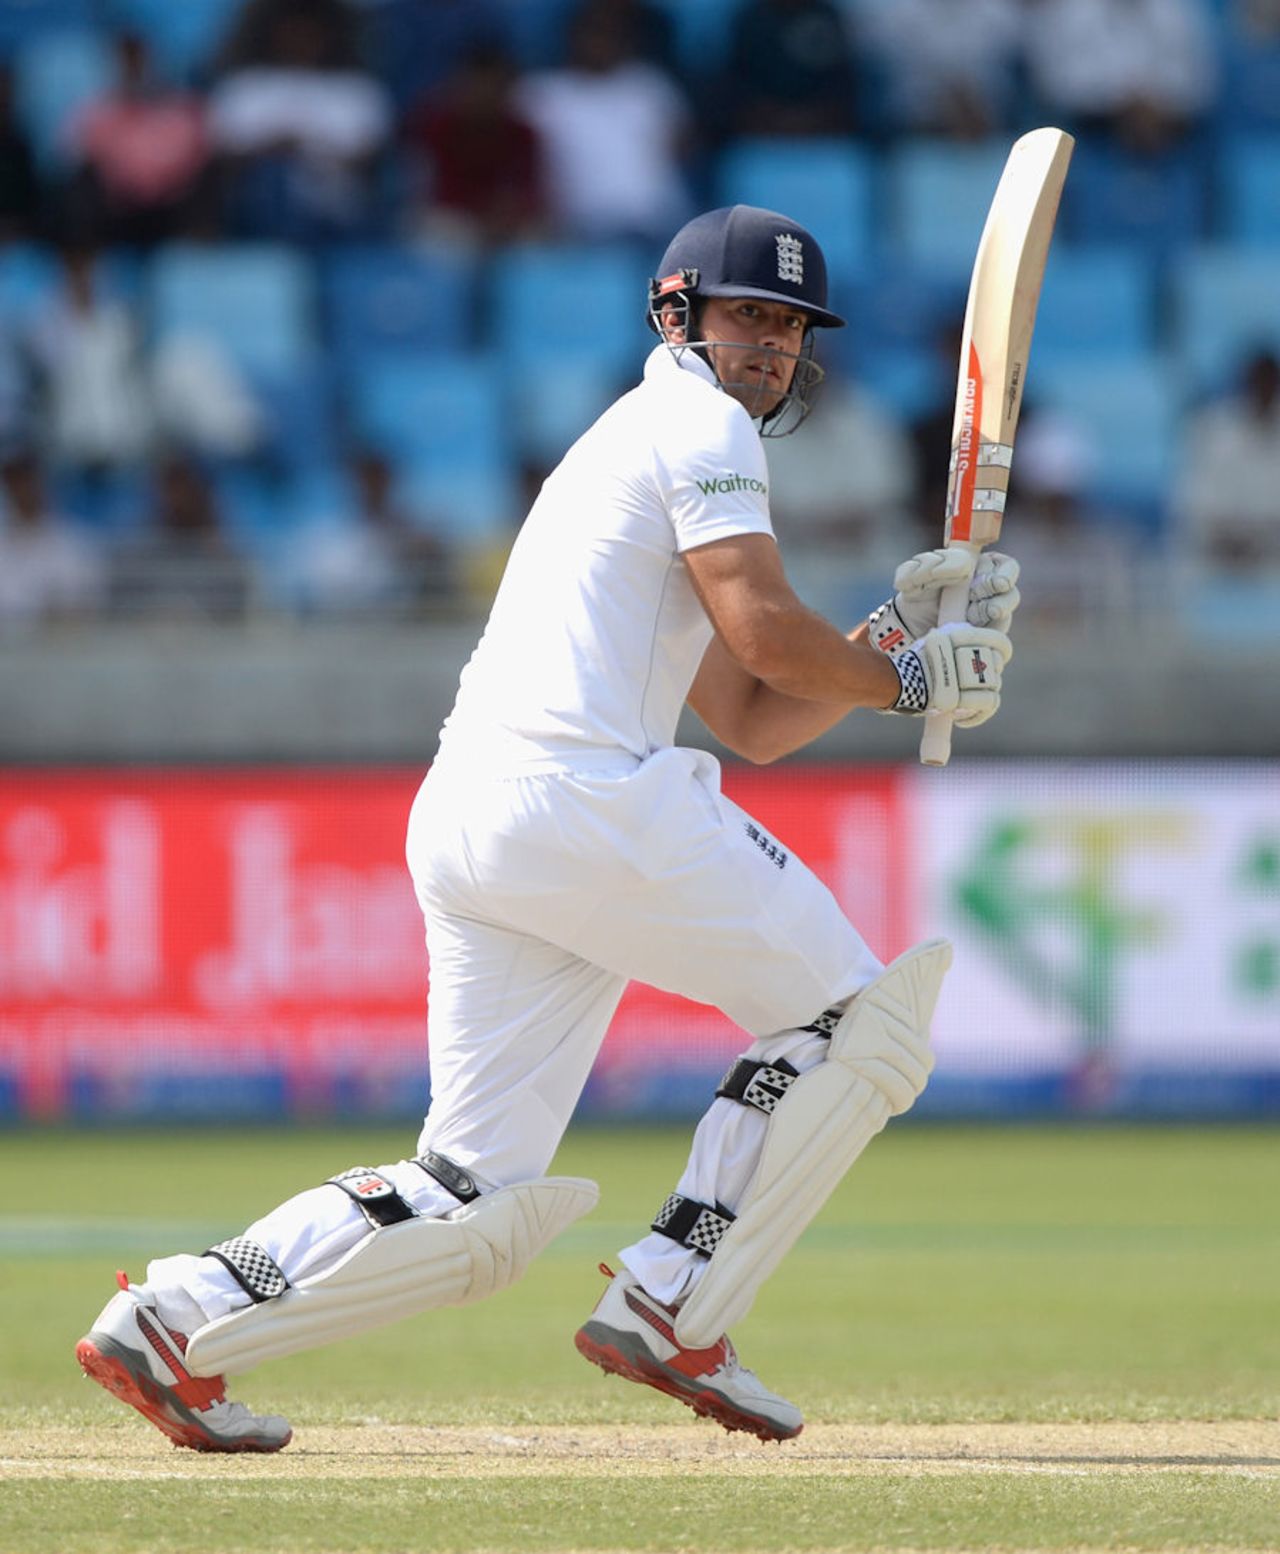 Alastair Cook had quite an act to follow after his Abu Dhabi marathon, Pakistan v England, 2nd Test, Dubai, 2nd day, October 23, 2015